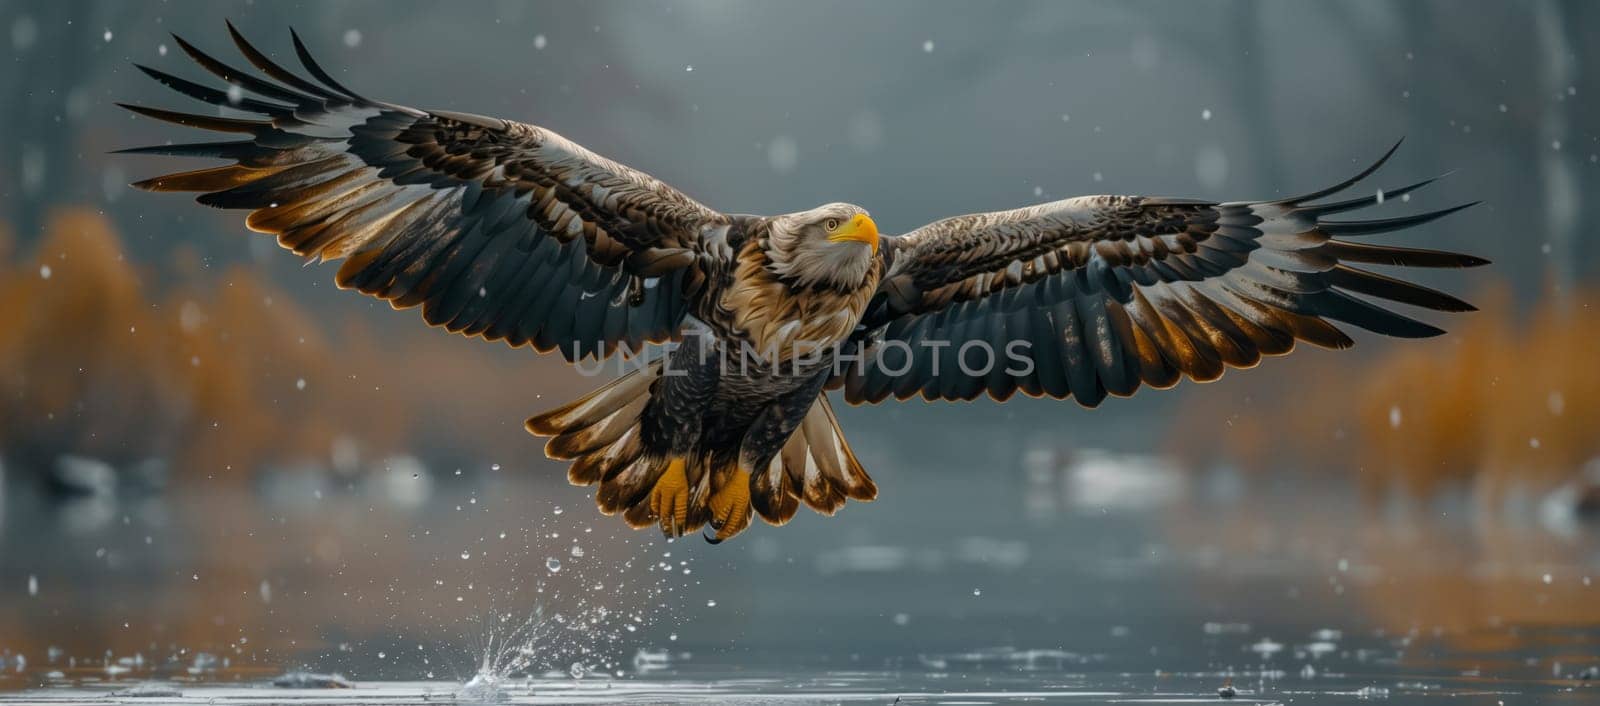 An Eagle from the family Accipitridae is soaring gracefully over a body of water, showcasing its powerful wings and sharp beak in its natural habitat